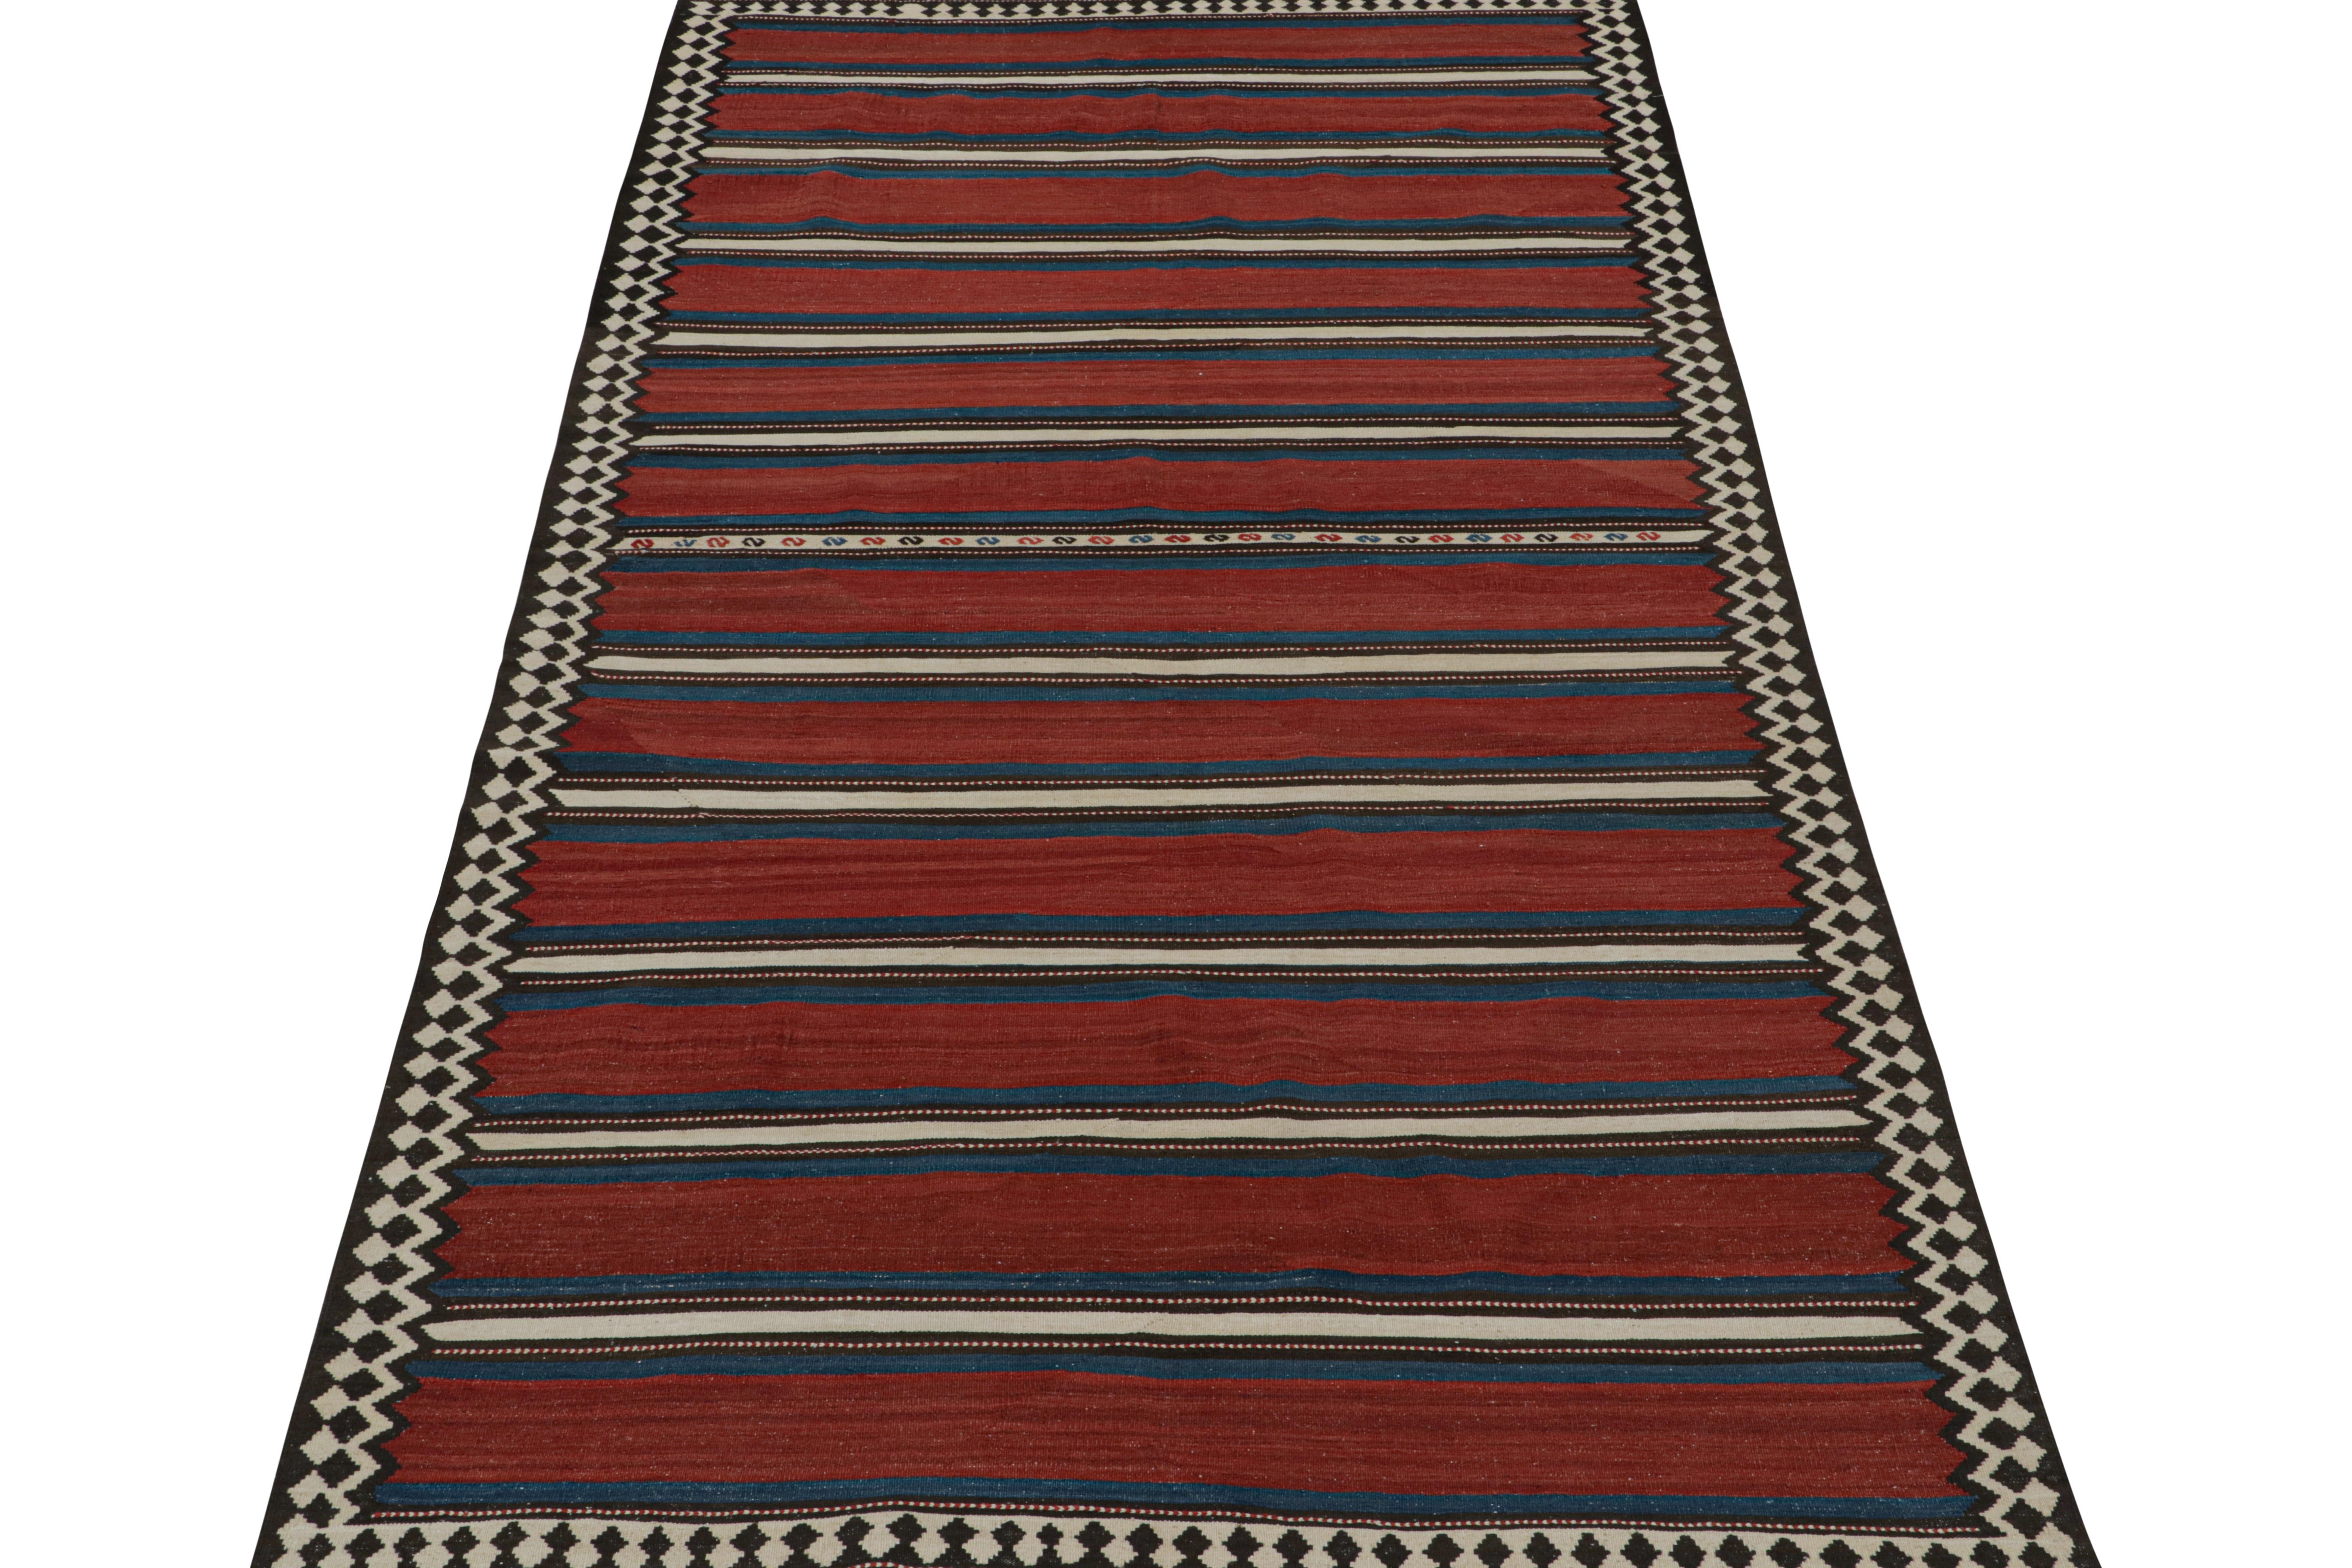 Vintage Shahsavan Persian Kilim in Red, Blue, White & Black by Rug & Kilim In Good Condition For Sale In Long Island City, NY